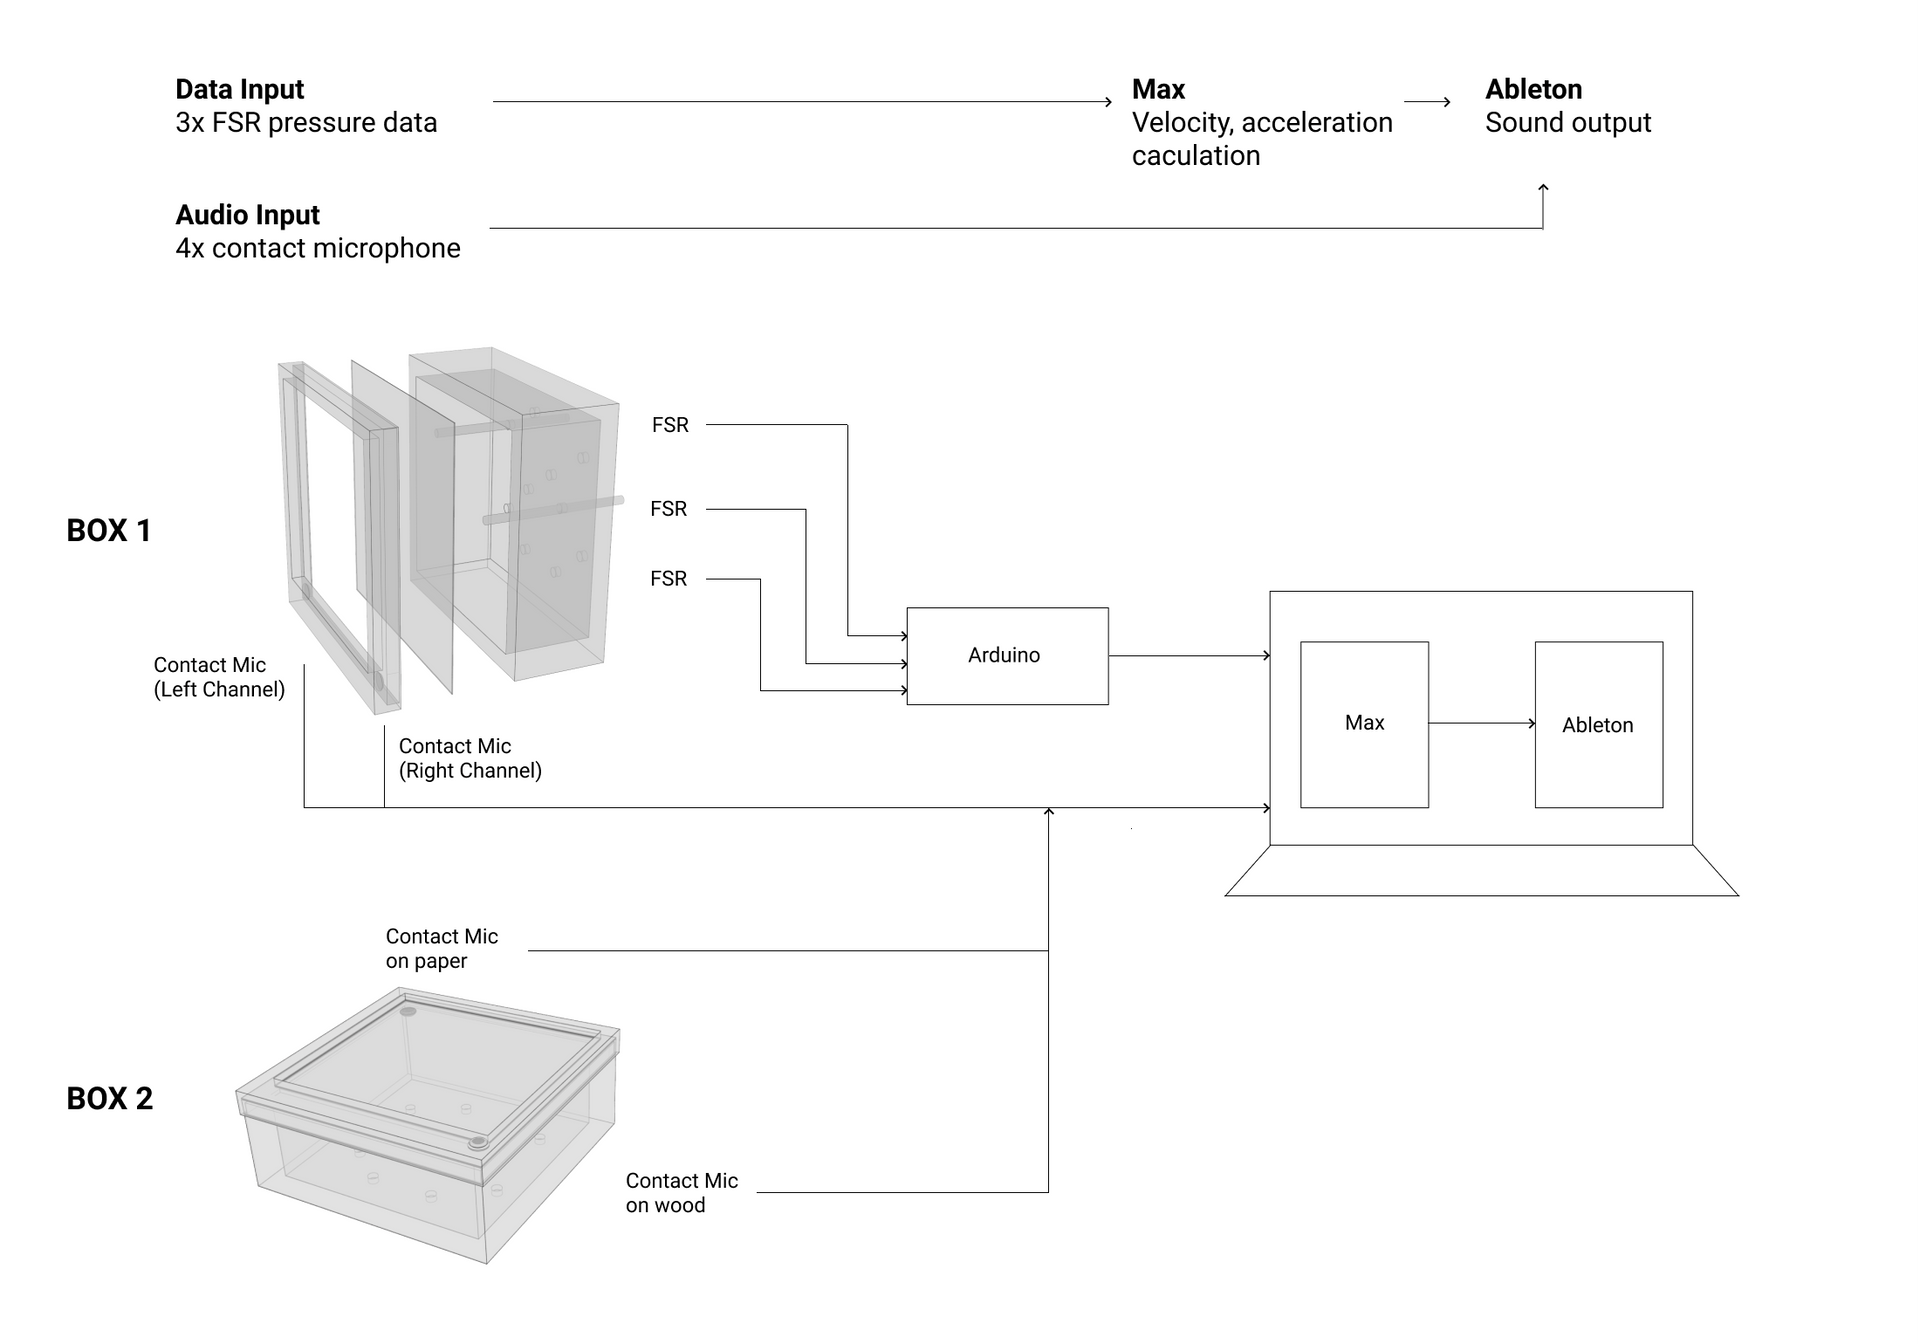 System diagram. Two boxes, each being recorded by two contact mics, connect to a computer. The first box has holes in the back through which pressure sensitive rods are inserted. Their pressure is used to generate sound